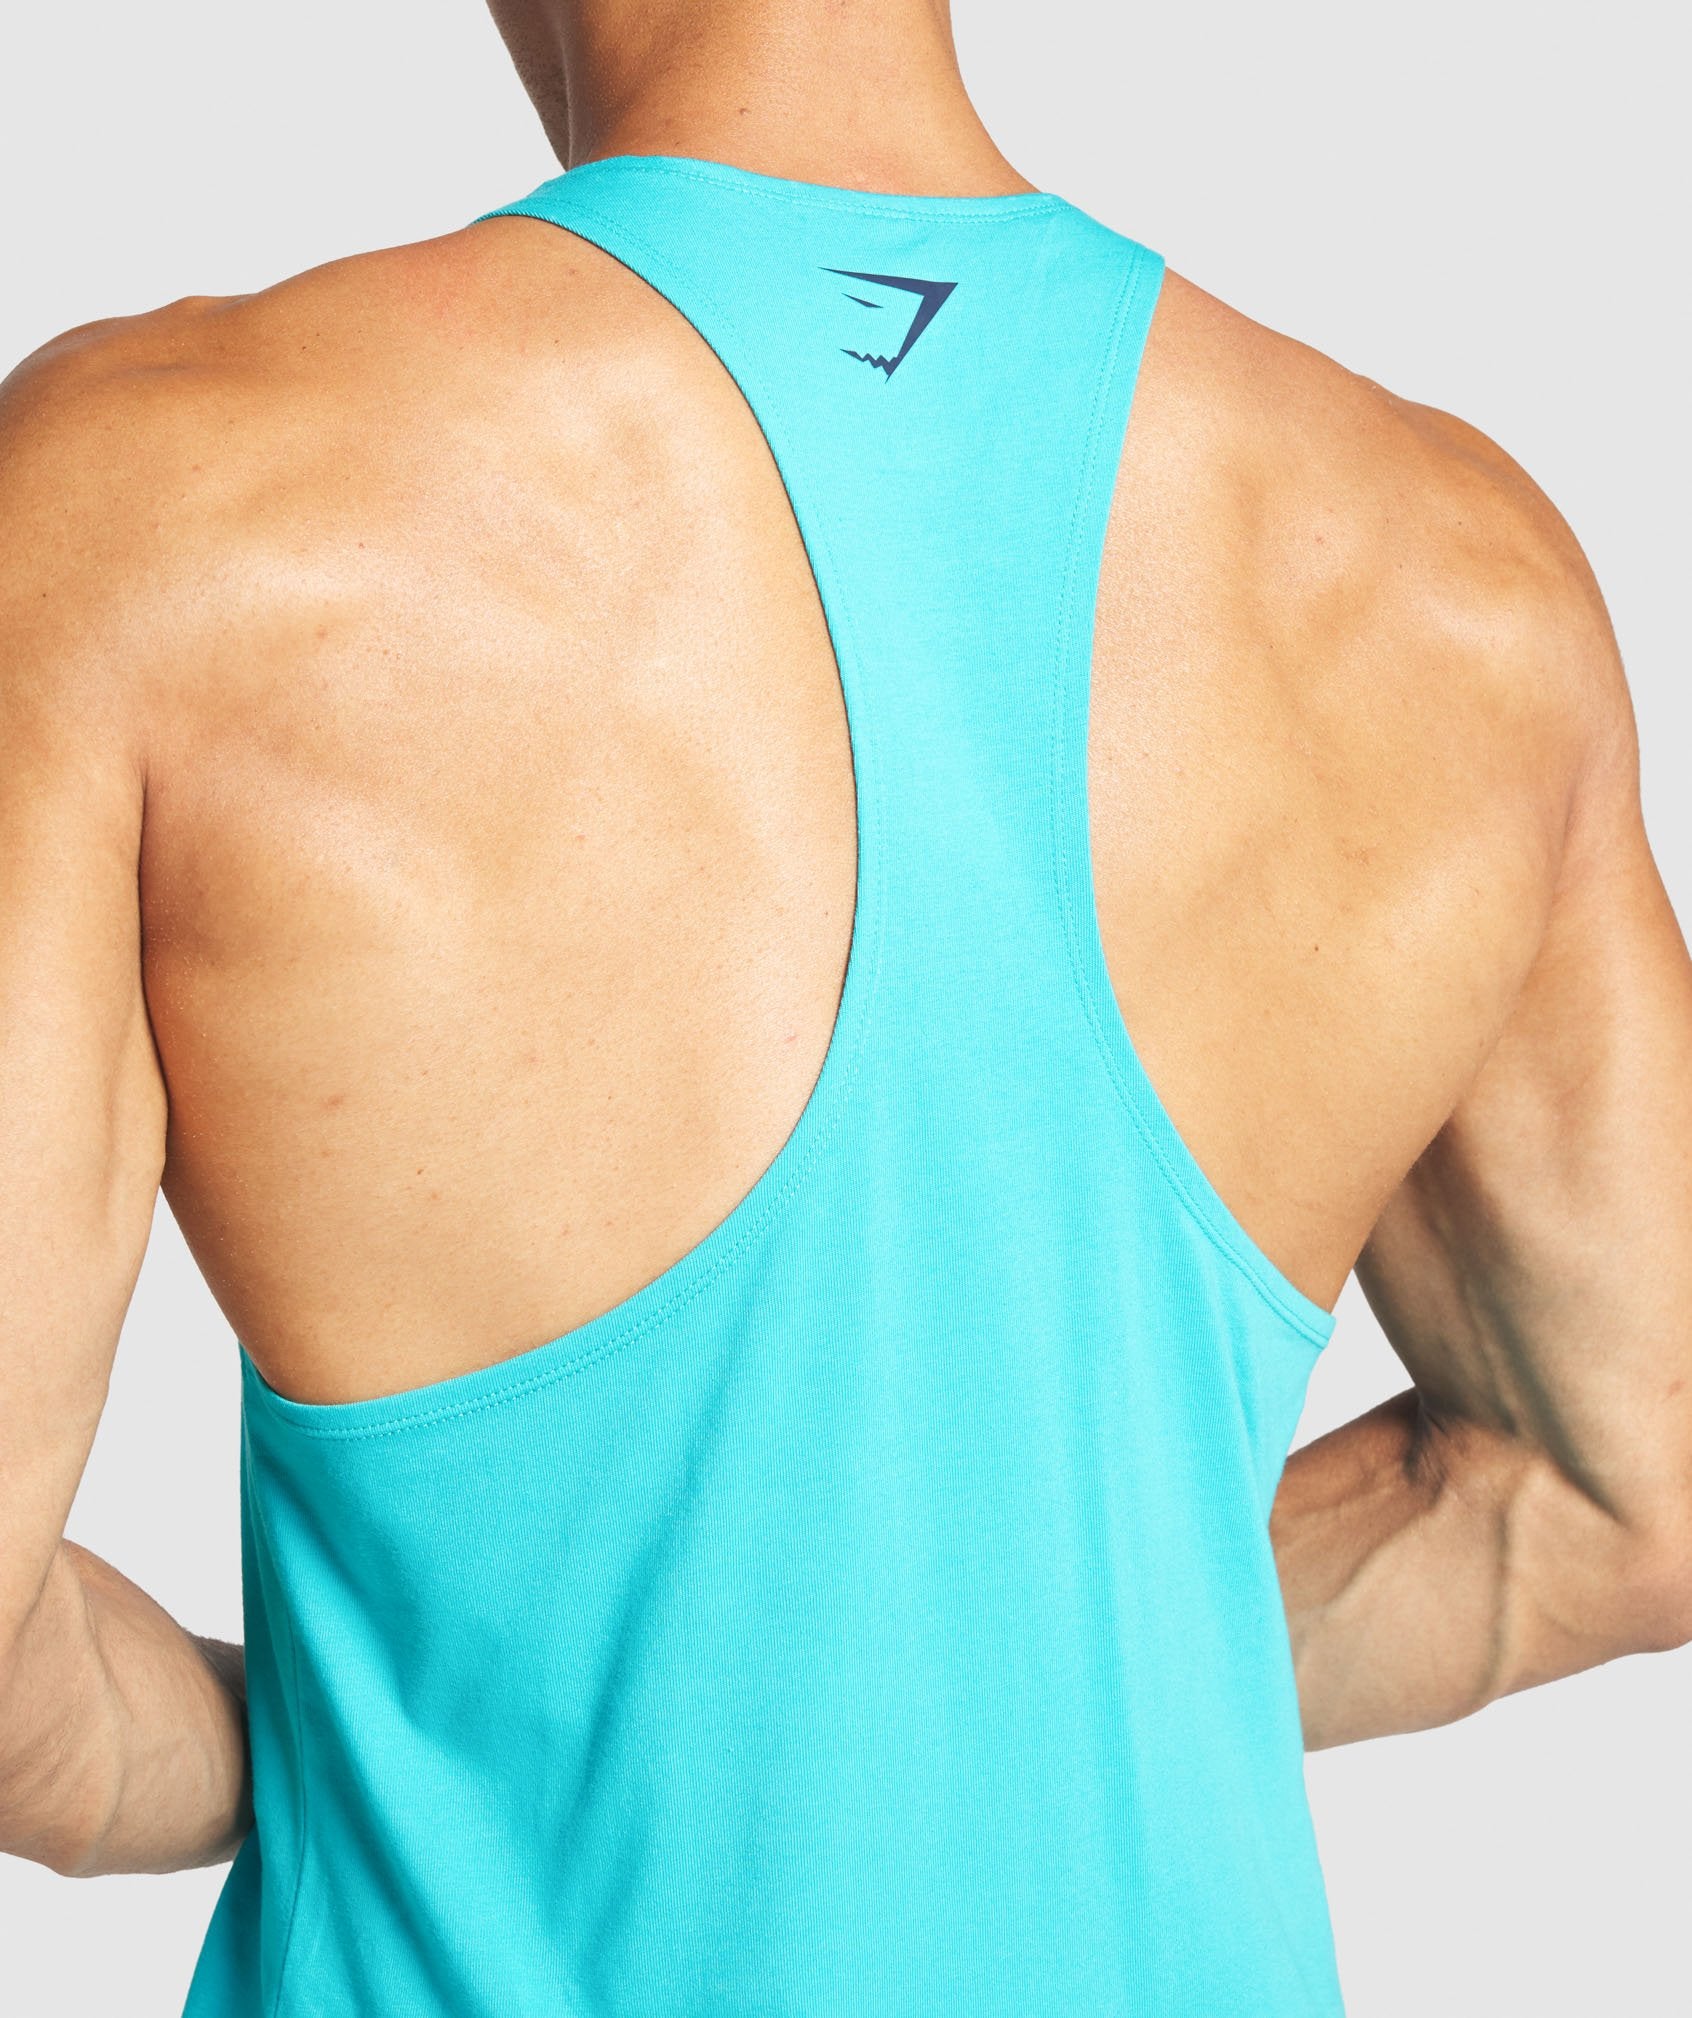 Graphic Geo Fade Stringer in Teal - view 6